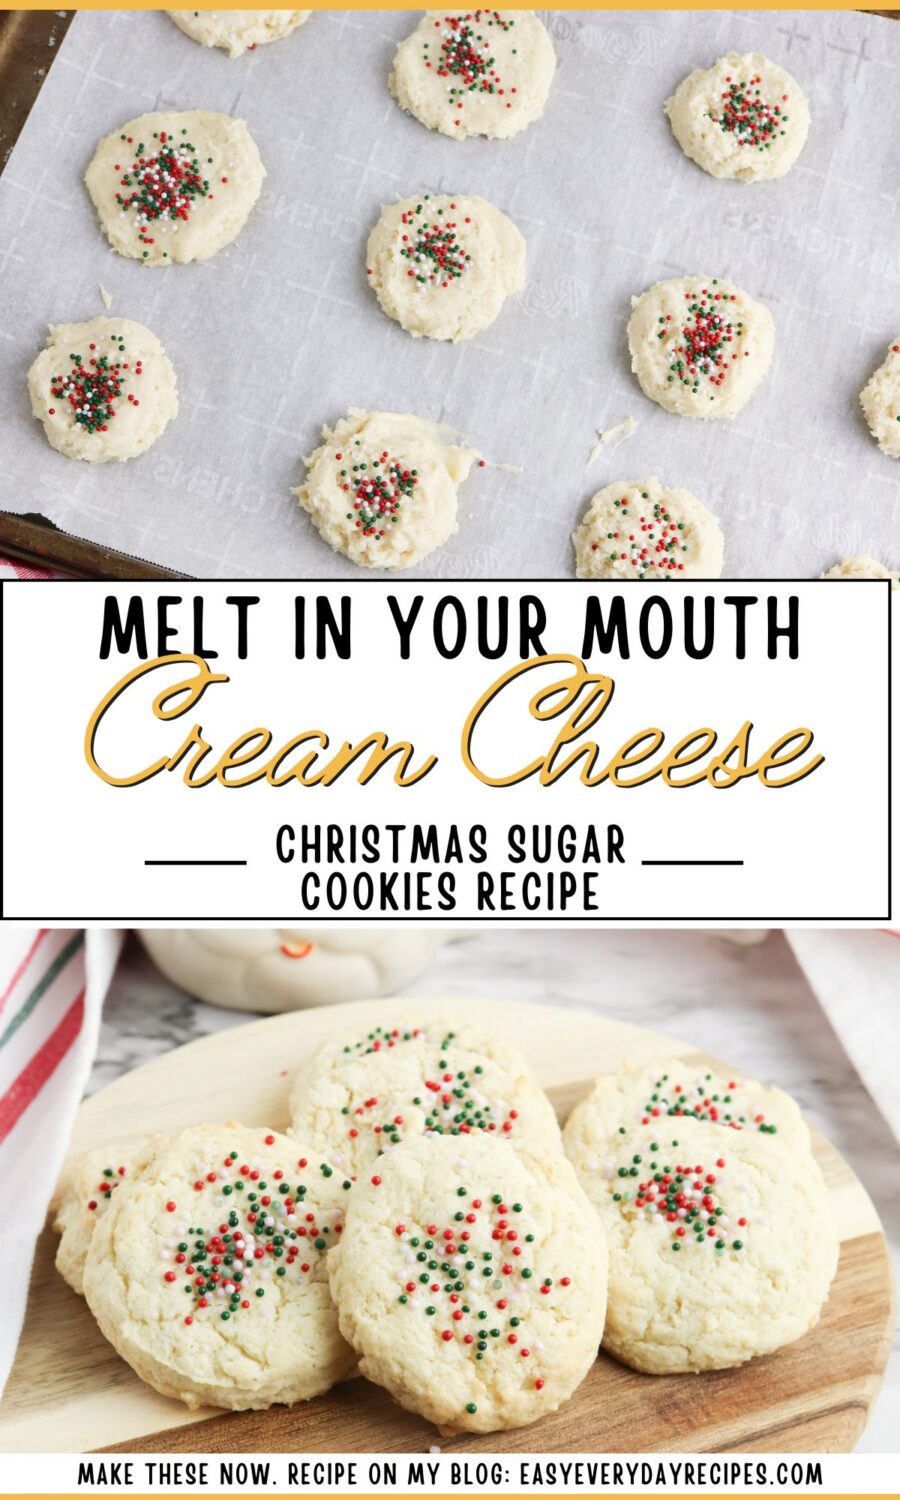 Melt in your mouth cream cheese christmas sugar cookies recipe.